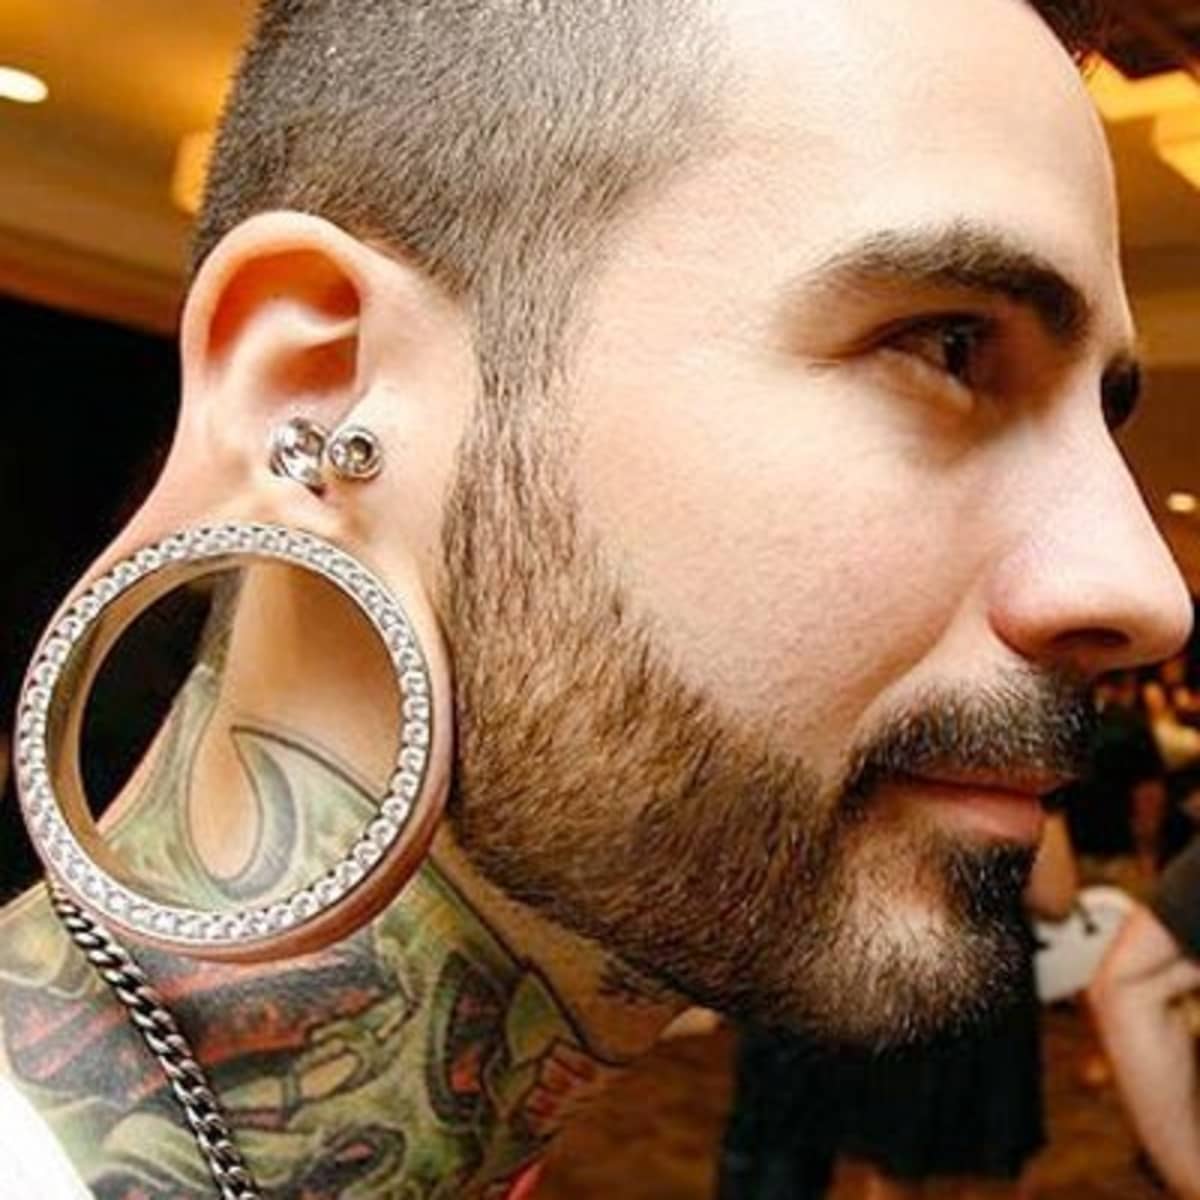 Close-up image of a person with beautifully stretched ear piercings adorned with decorative plugs, illustrating the art and appeal of ear gauges.